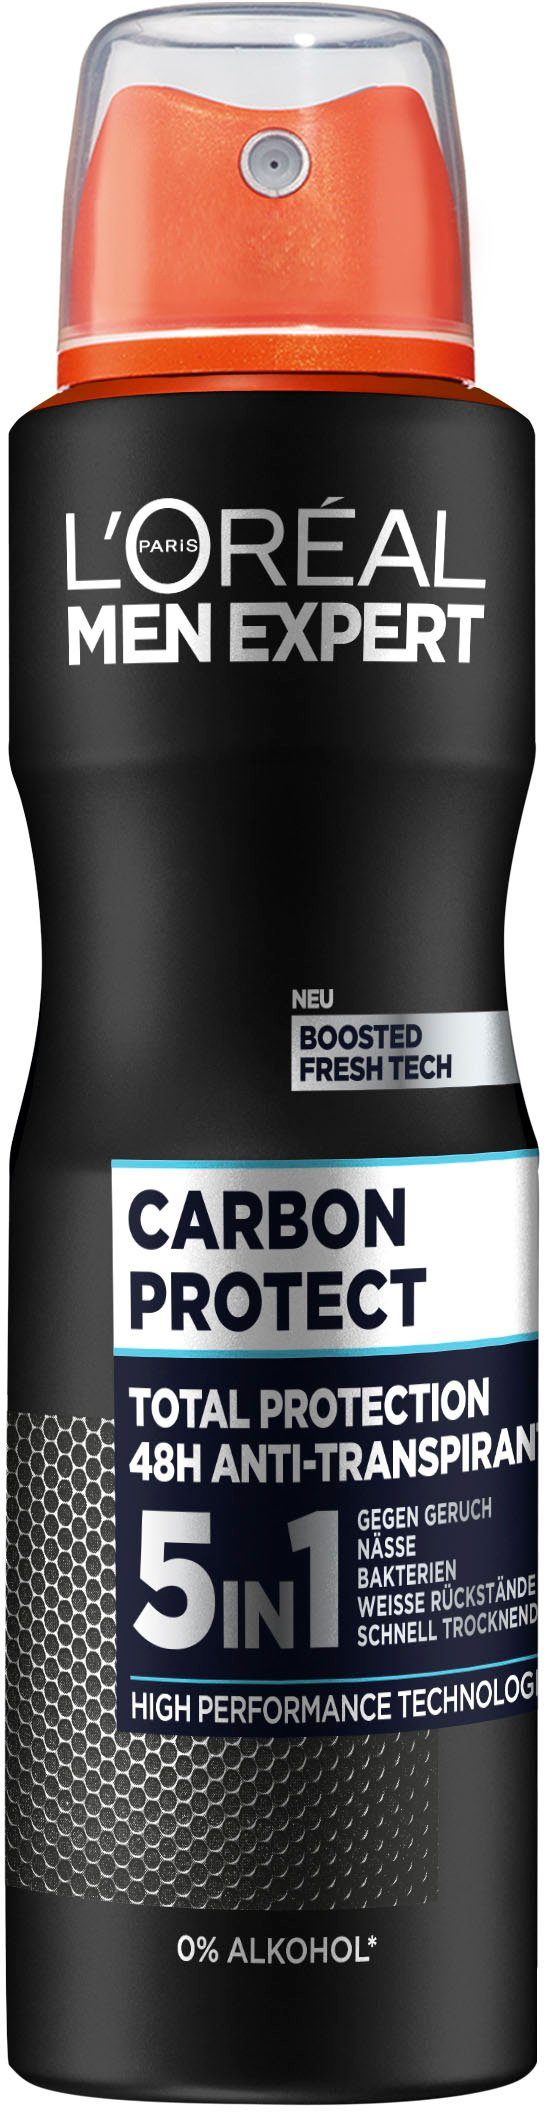 Deo-Spray Protect L'ORÉAL Carbon PARIS 6-tlg. EXPERT Spray Packung, Deo MEN 5-in-1,